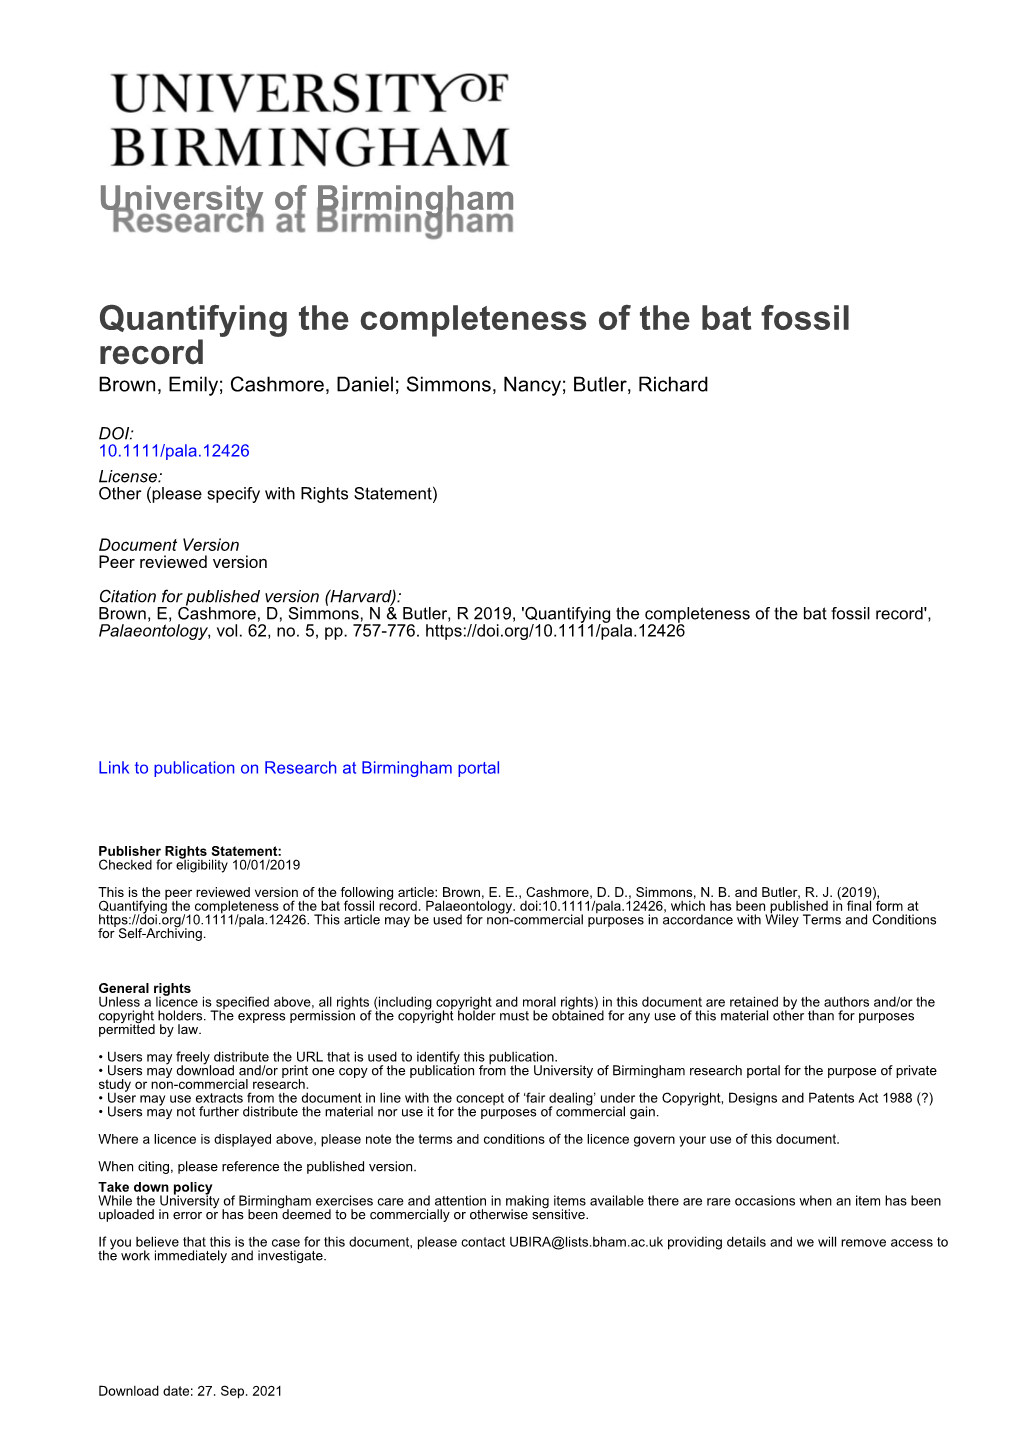 University of Birmingham Quantifying the Completeness of the Bat Fossil